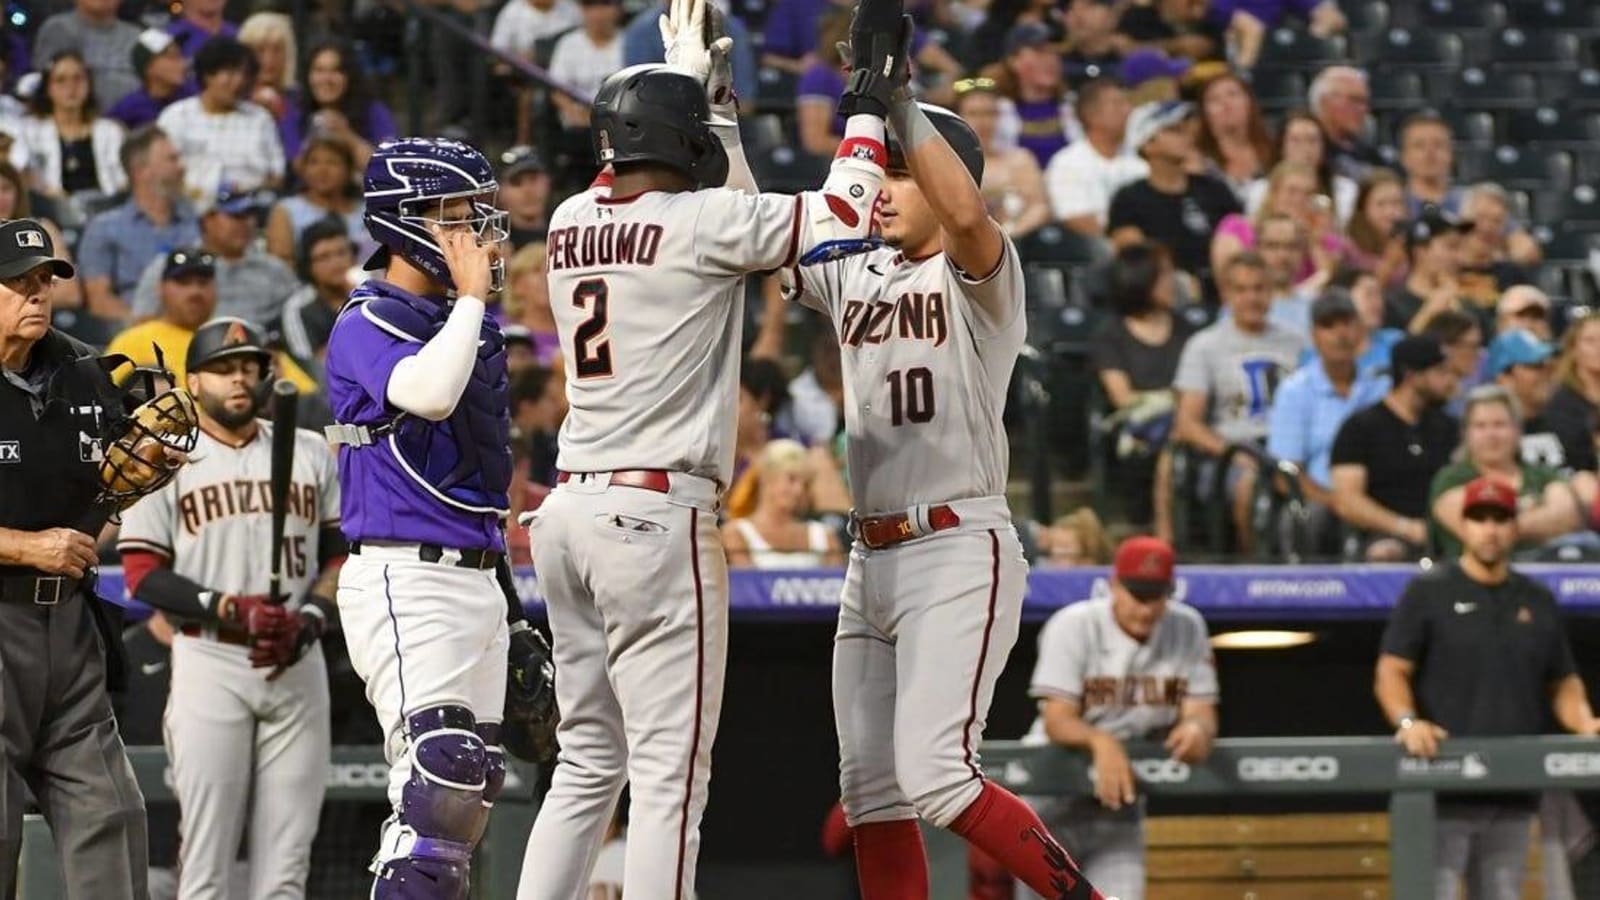 D-backs look to reach milestone win with victory over Rockies